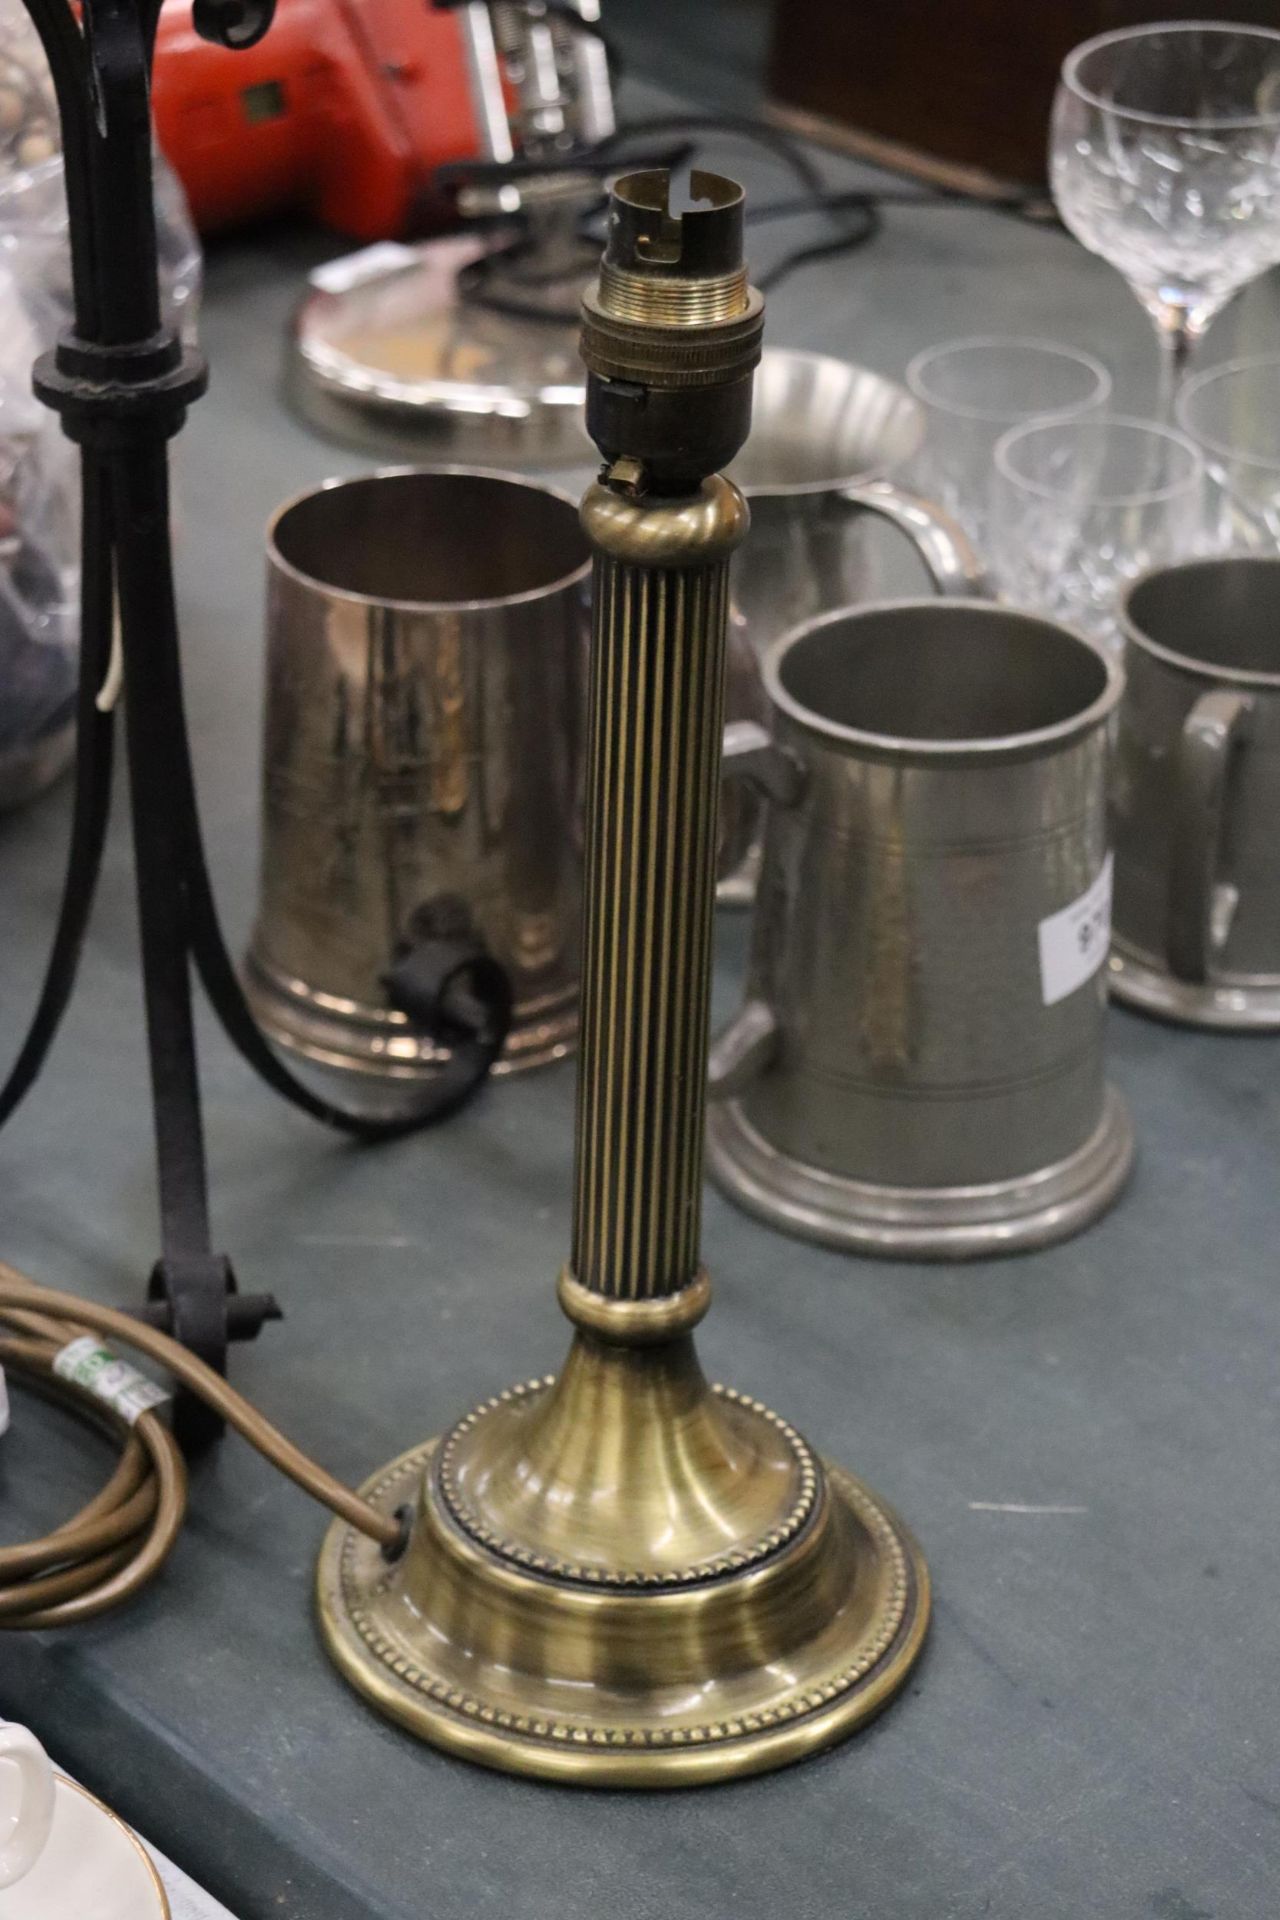 TWO TABLE LAMPS TO INCLUDE ONE WITH BRASS COLUMN BASE AND A CAST METAL ONE - Image 7 of 8